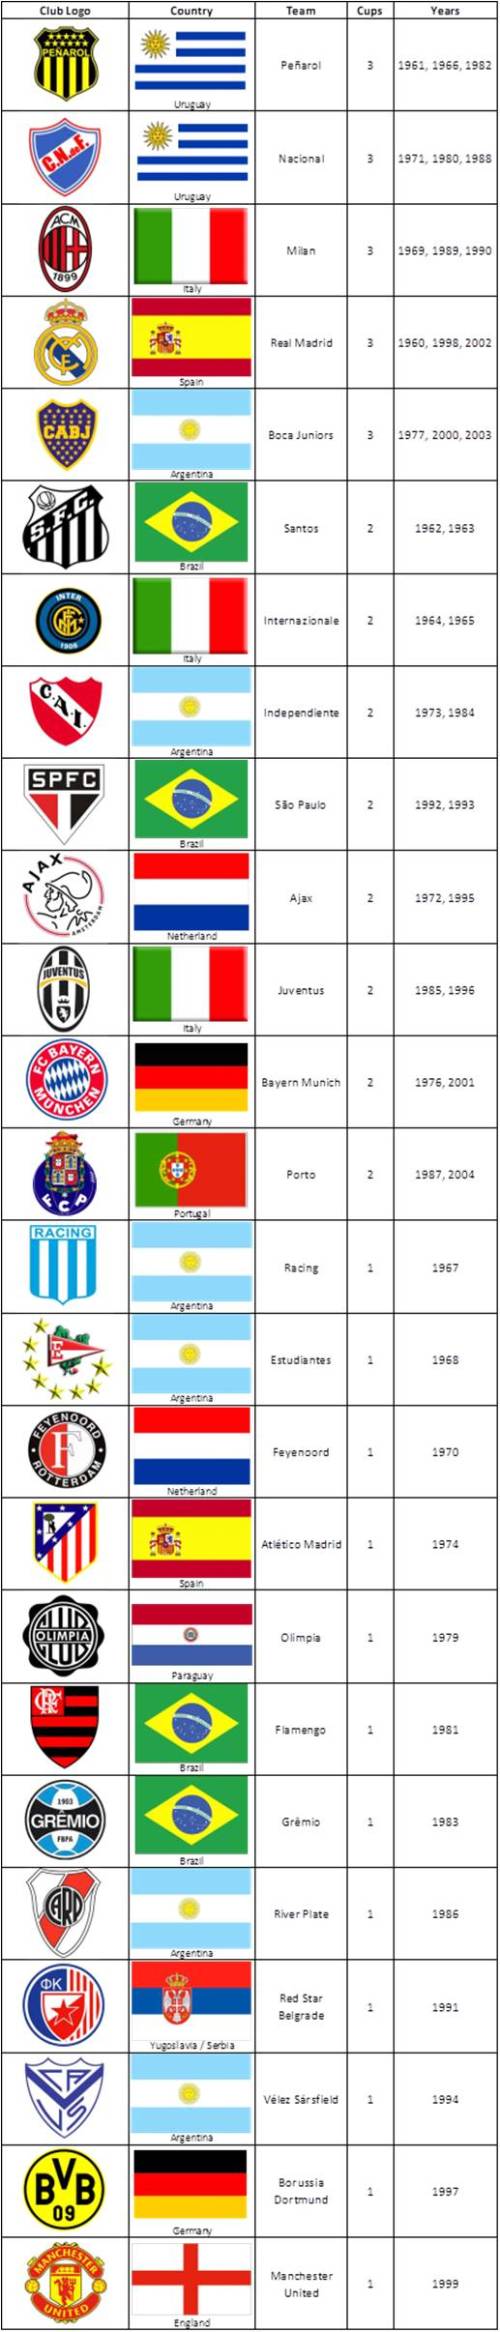 Intercontinental Cup Champions 1960 - 2004